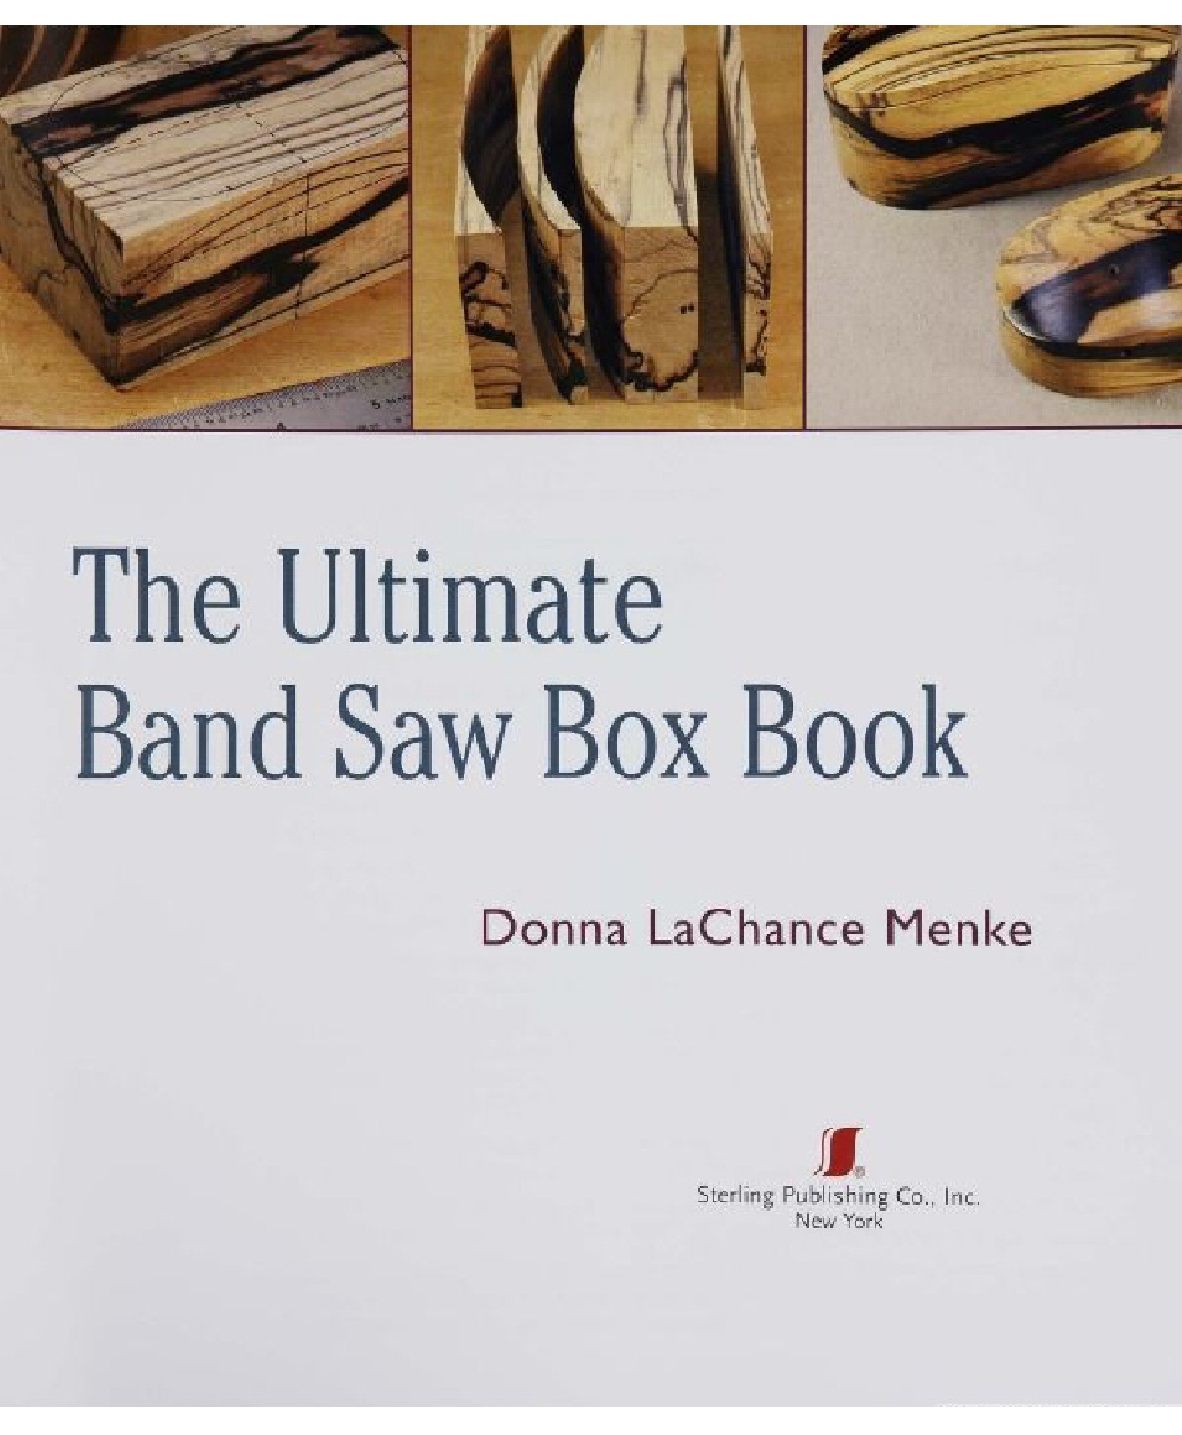 The Ultimate Band Saw Box Book - Donna LaChance Menke